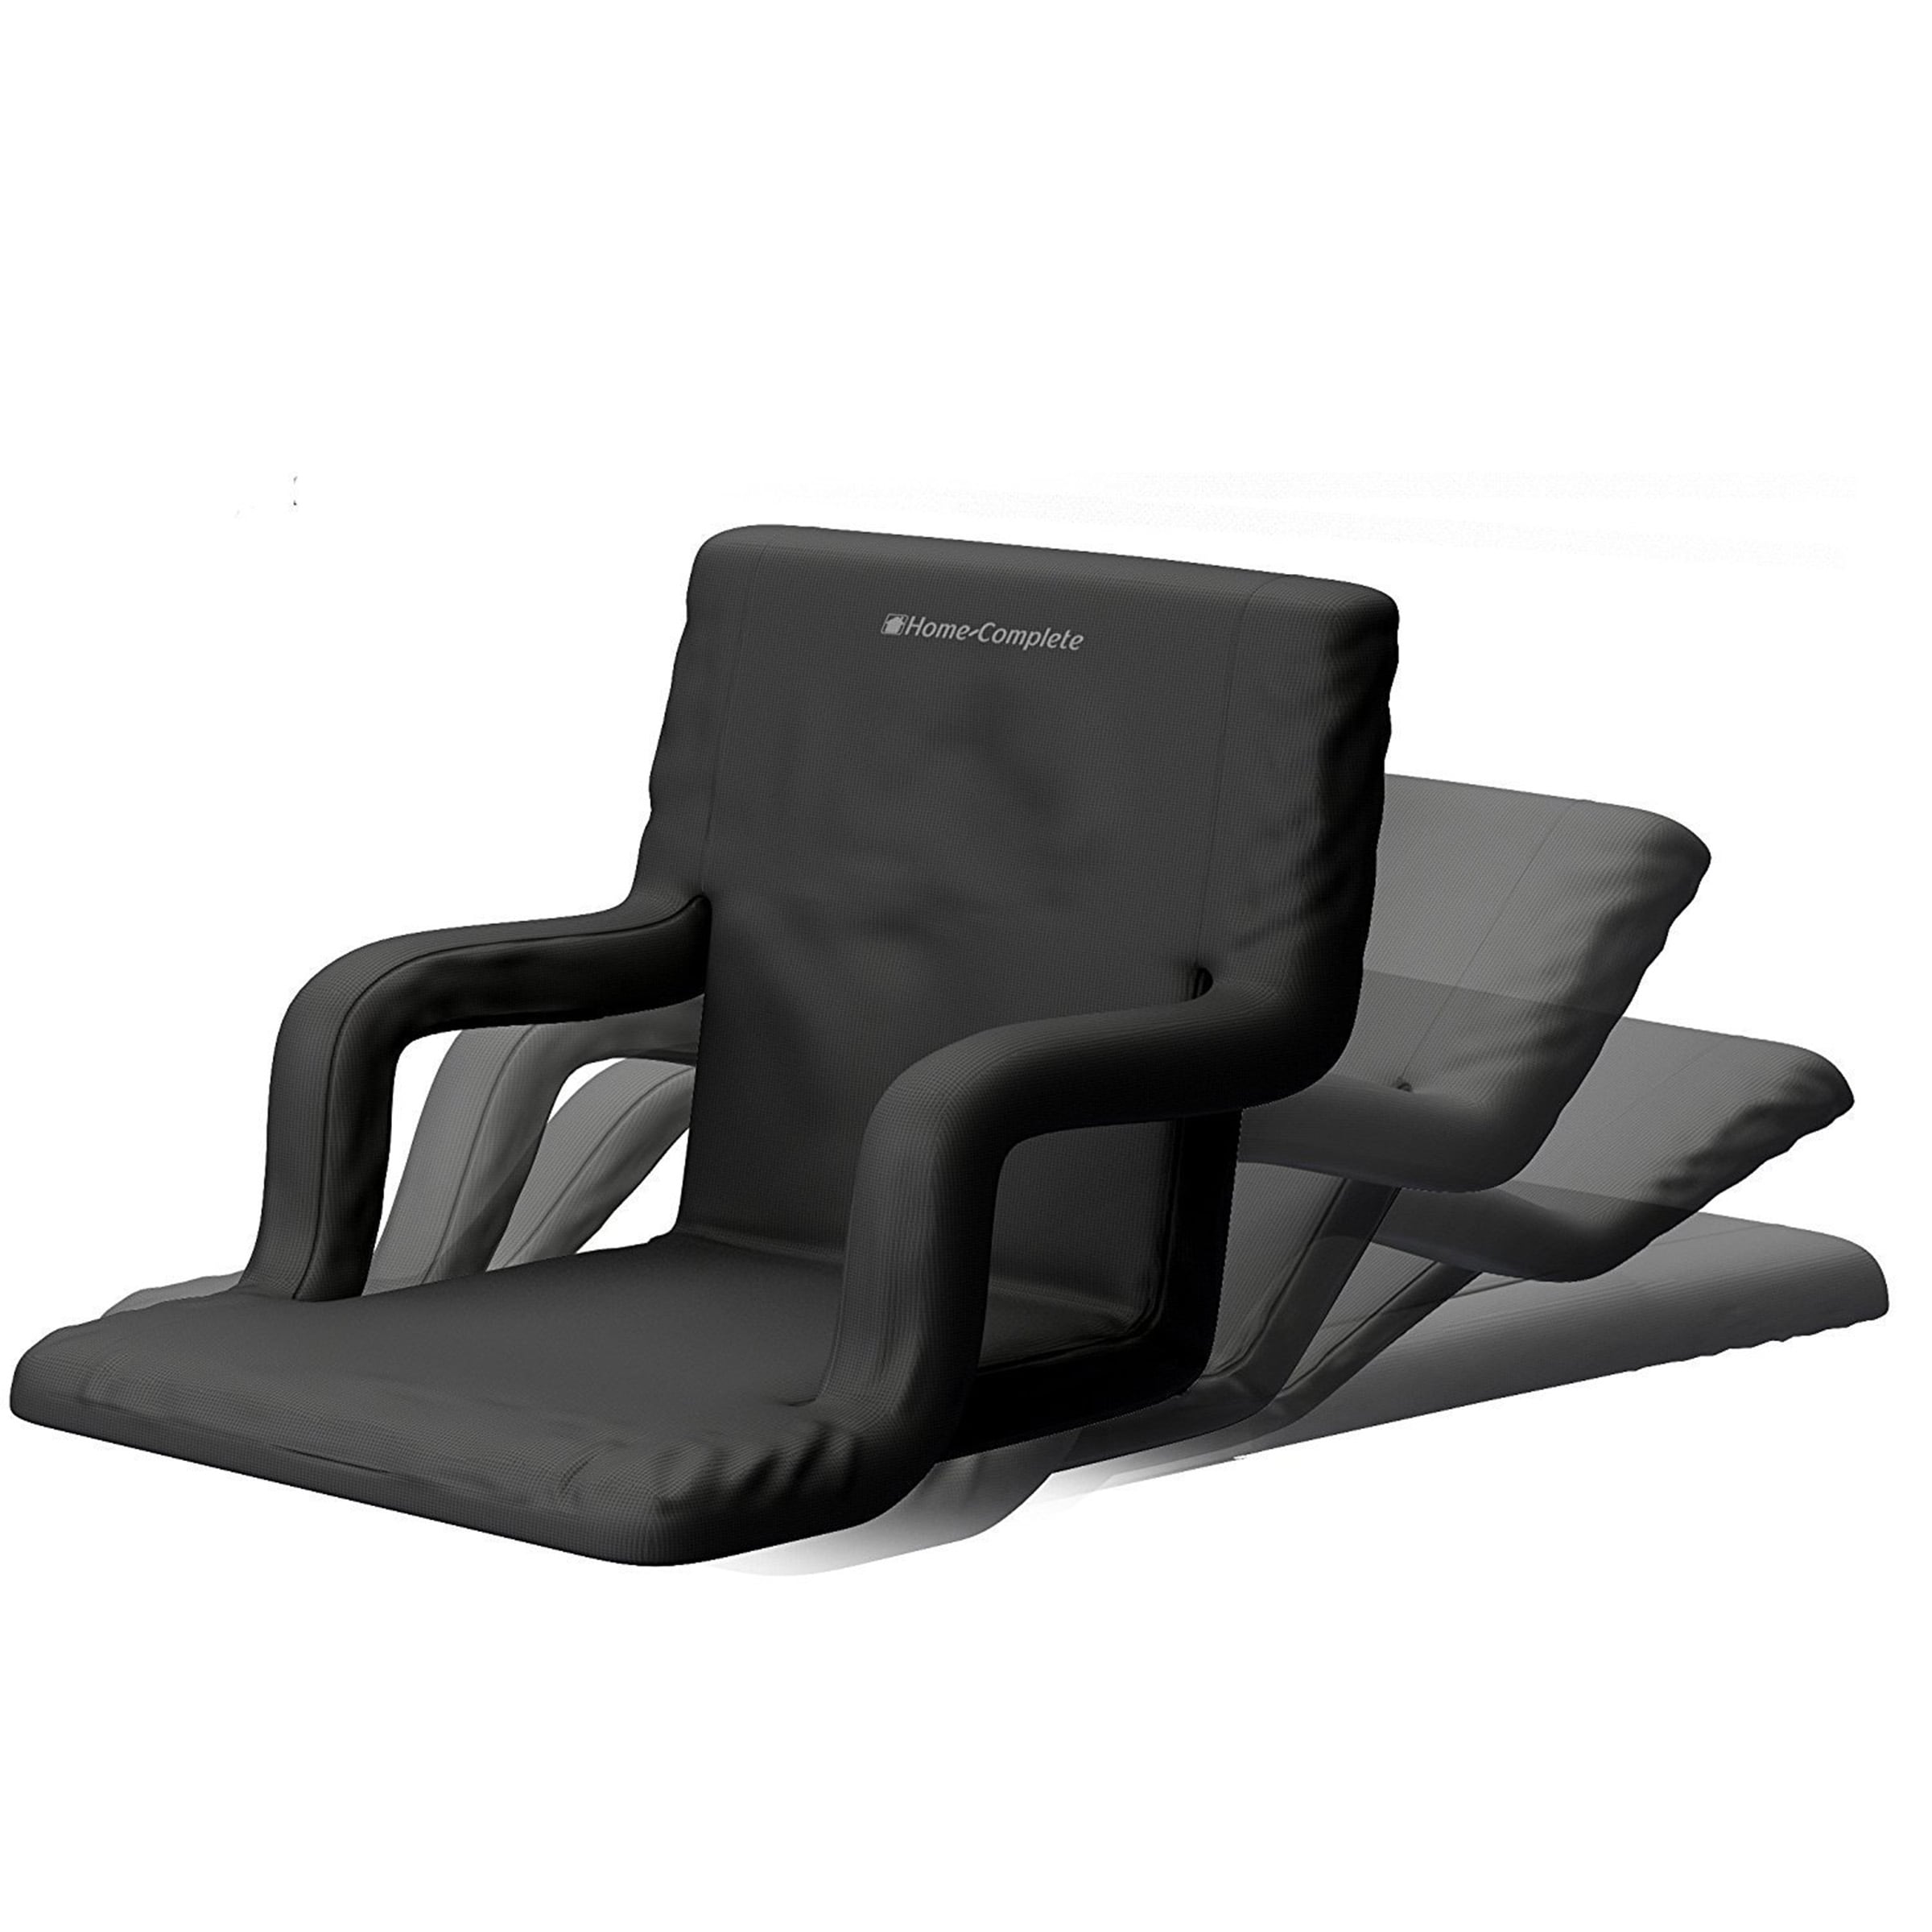 https://ak1.ostkcdn.com/images/products/is/images/direct/e52e139795eeebe2a267a49eb6815747834546b7/Stadium-Seat-Chair-2-Pack-Bleacher-Cushions-with-Padded-Back-Support-By-Home-Complete.jpg